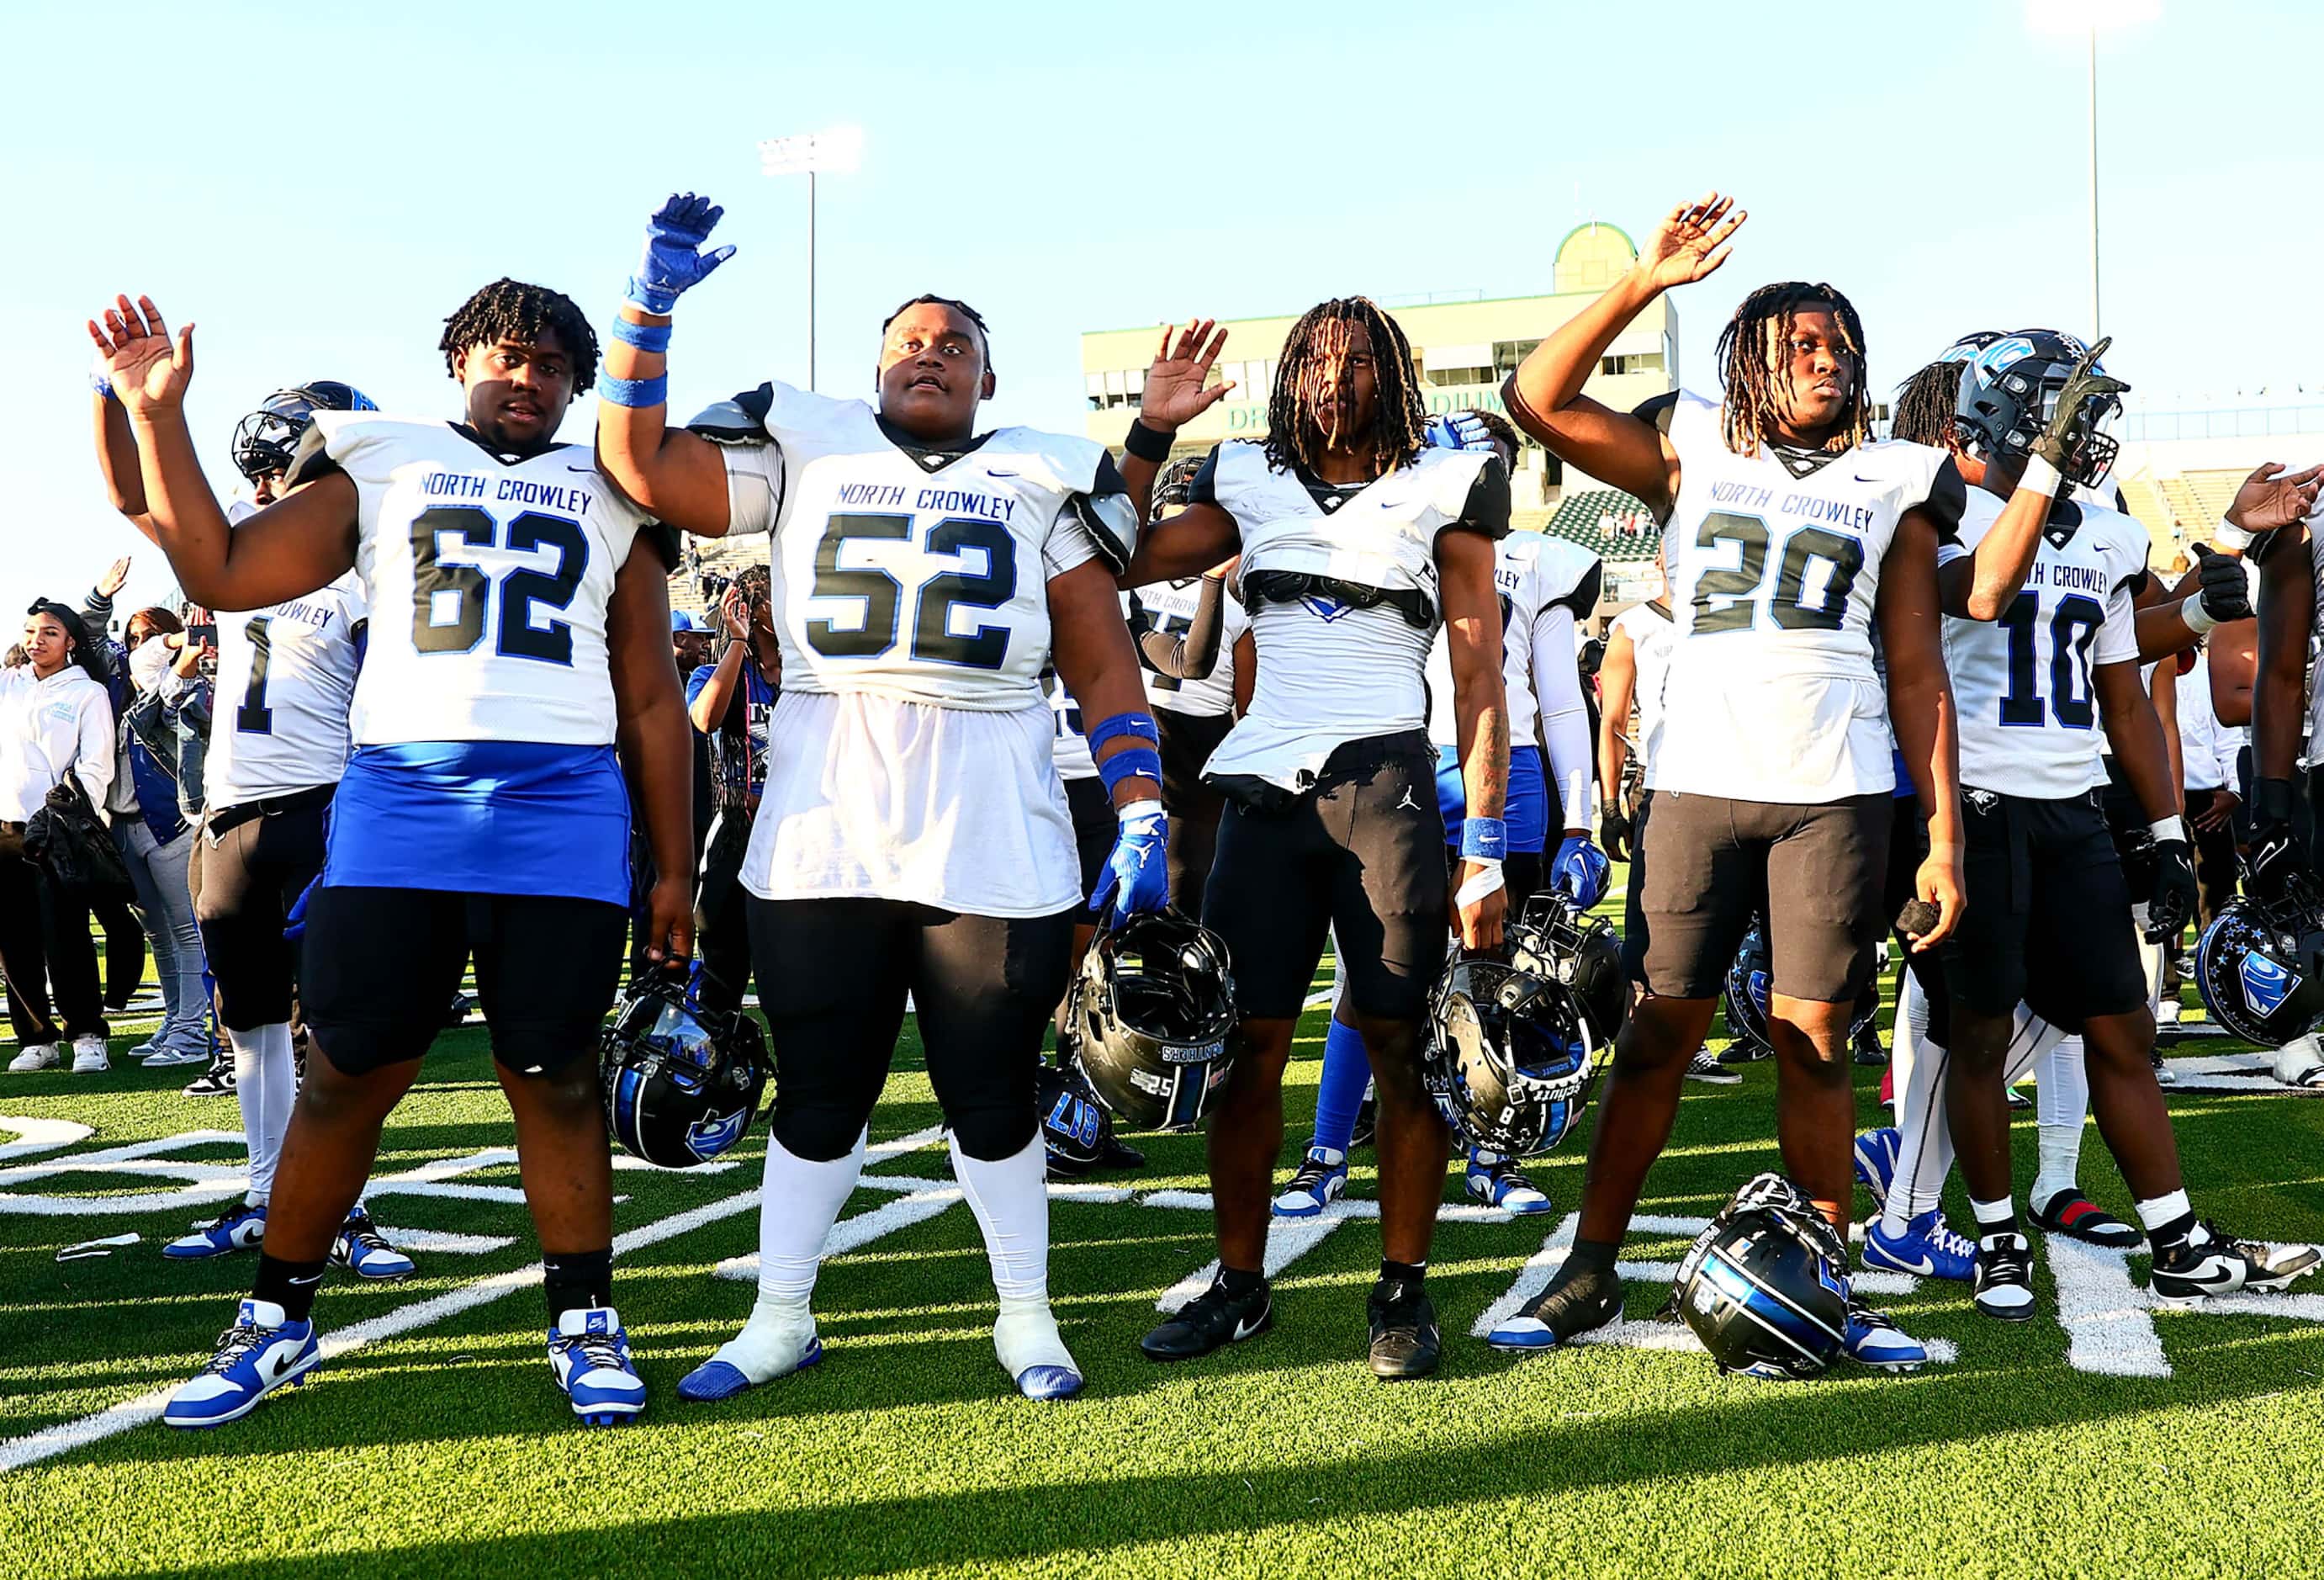 North Crowley beats Allen, 49-37 in the 6A Division I Region I final played on December 2,...